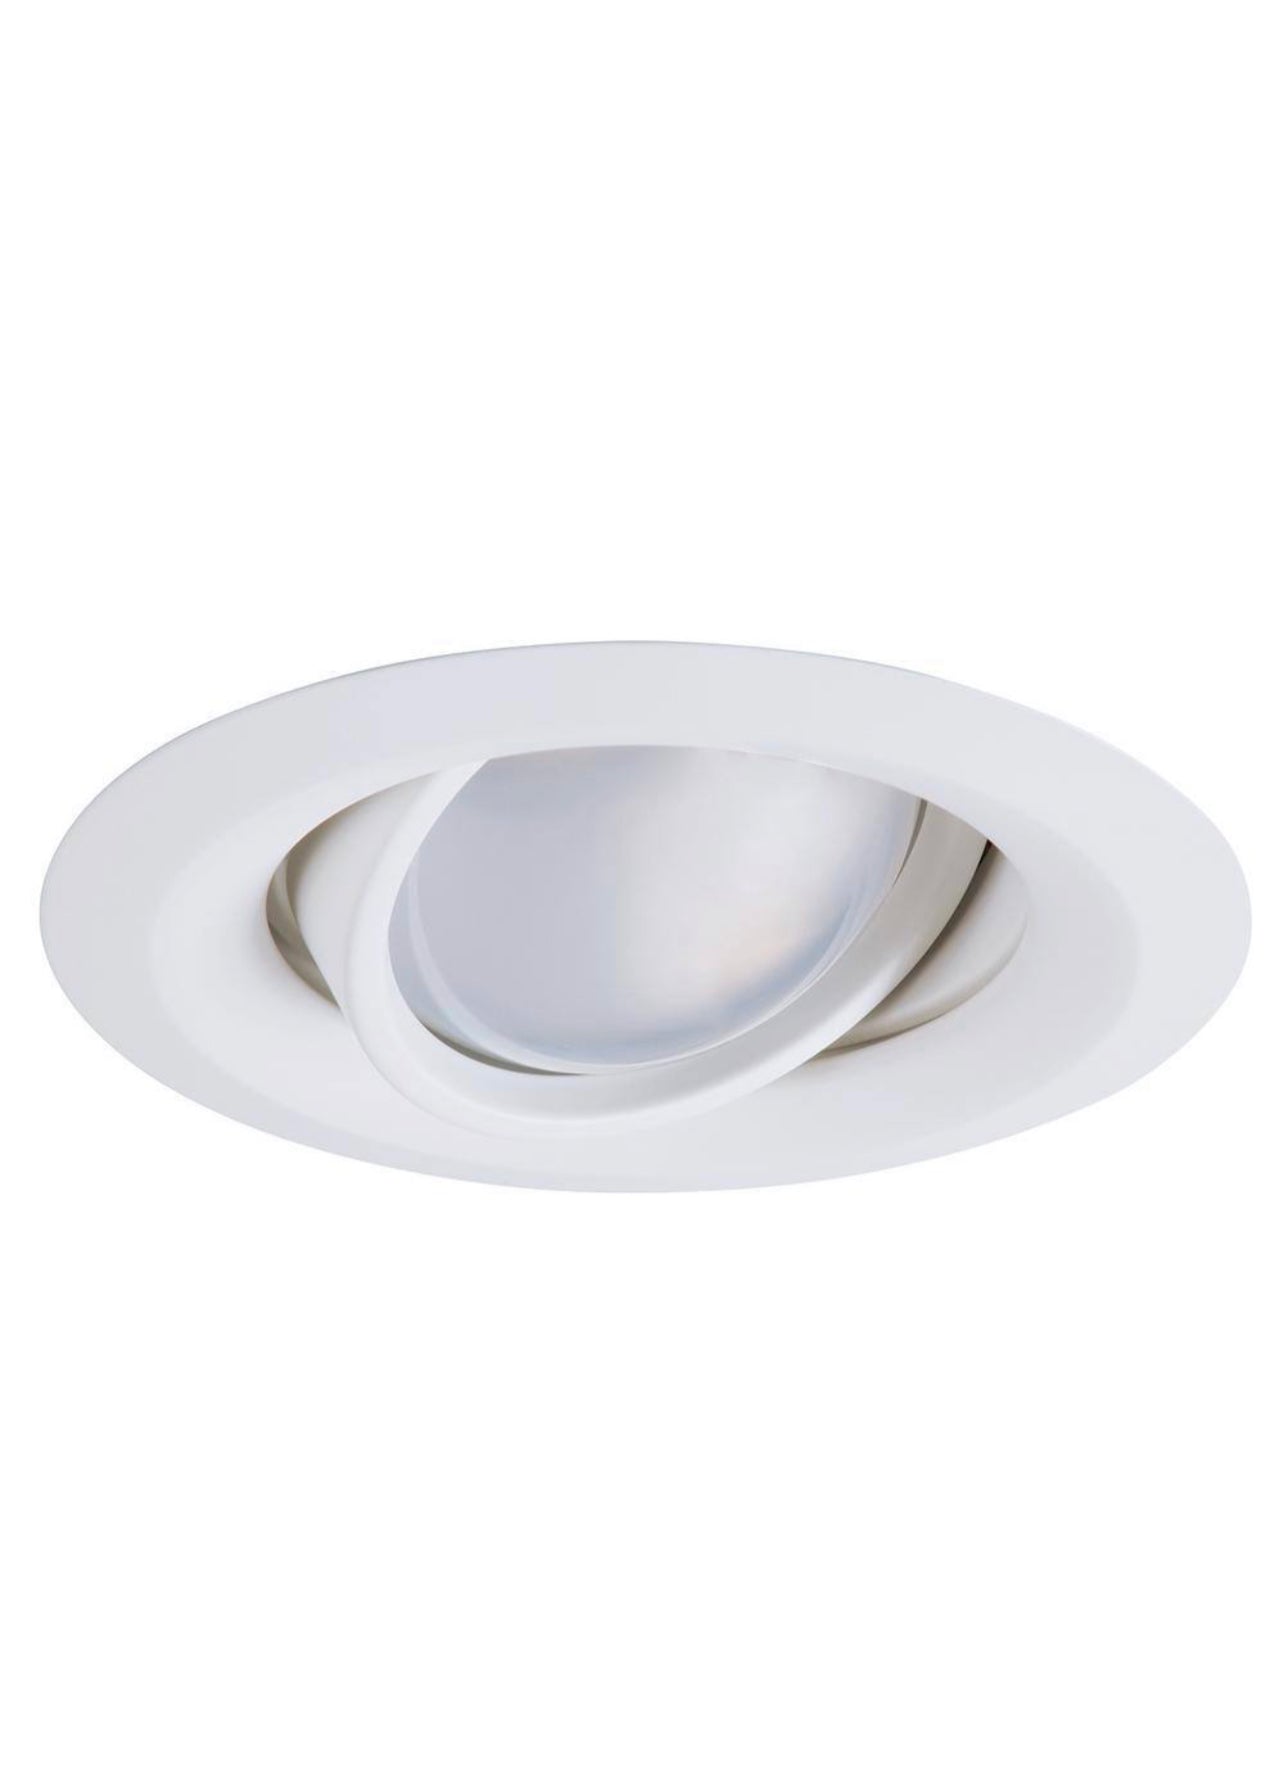 Halo E26 Series 5 in. White Recessed Ceiling Light Self Flanged Adjustable Gimbal with 25 Degree Tilt